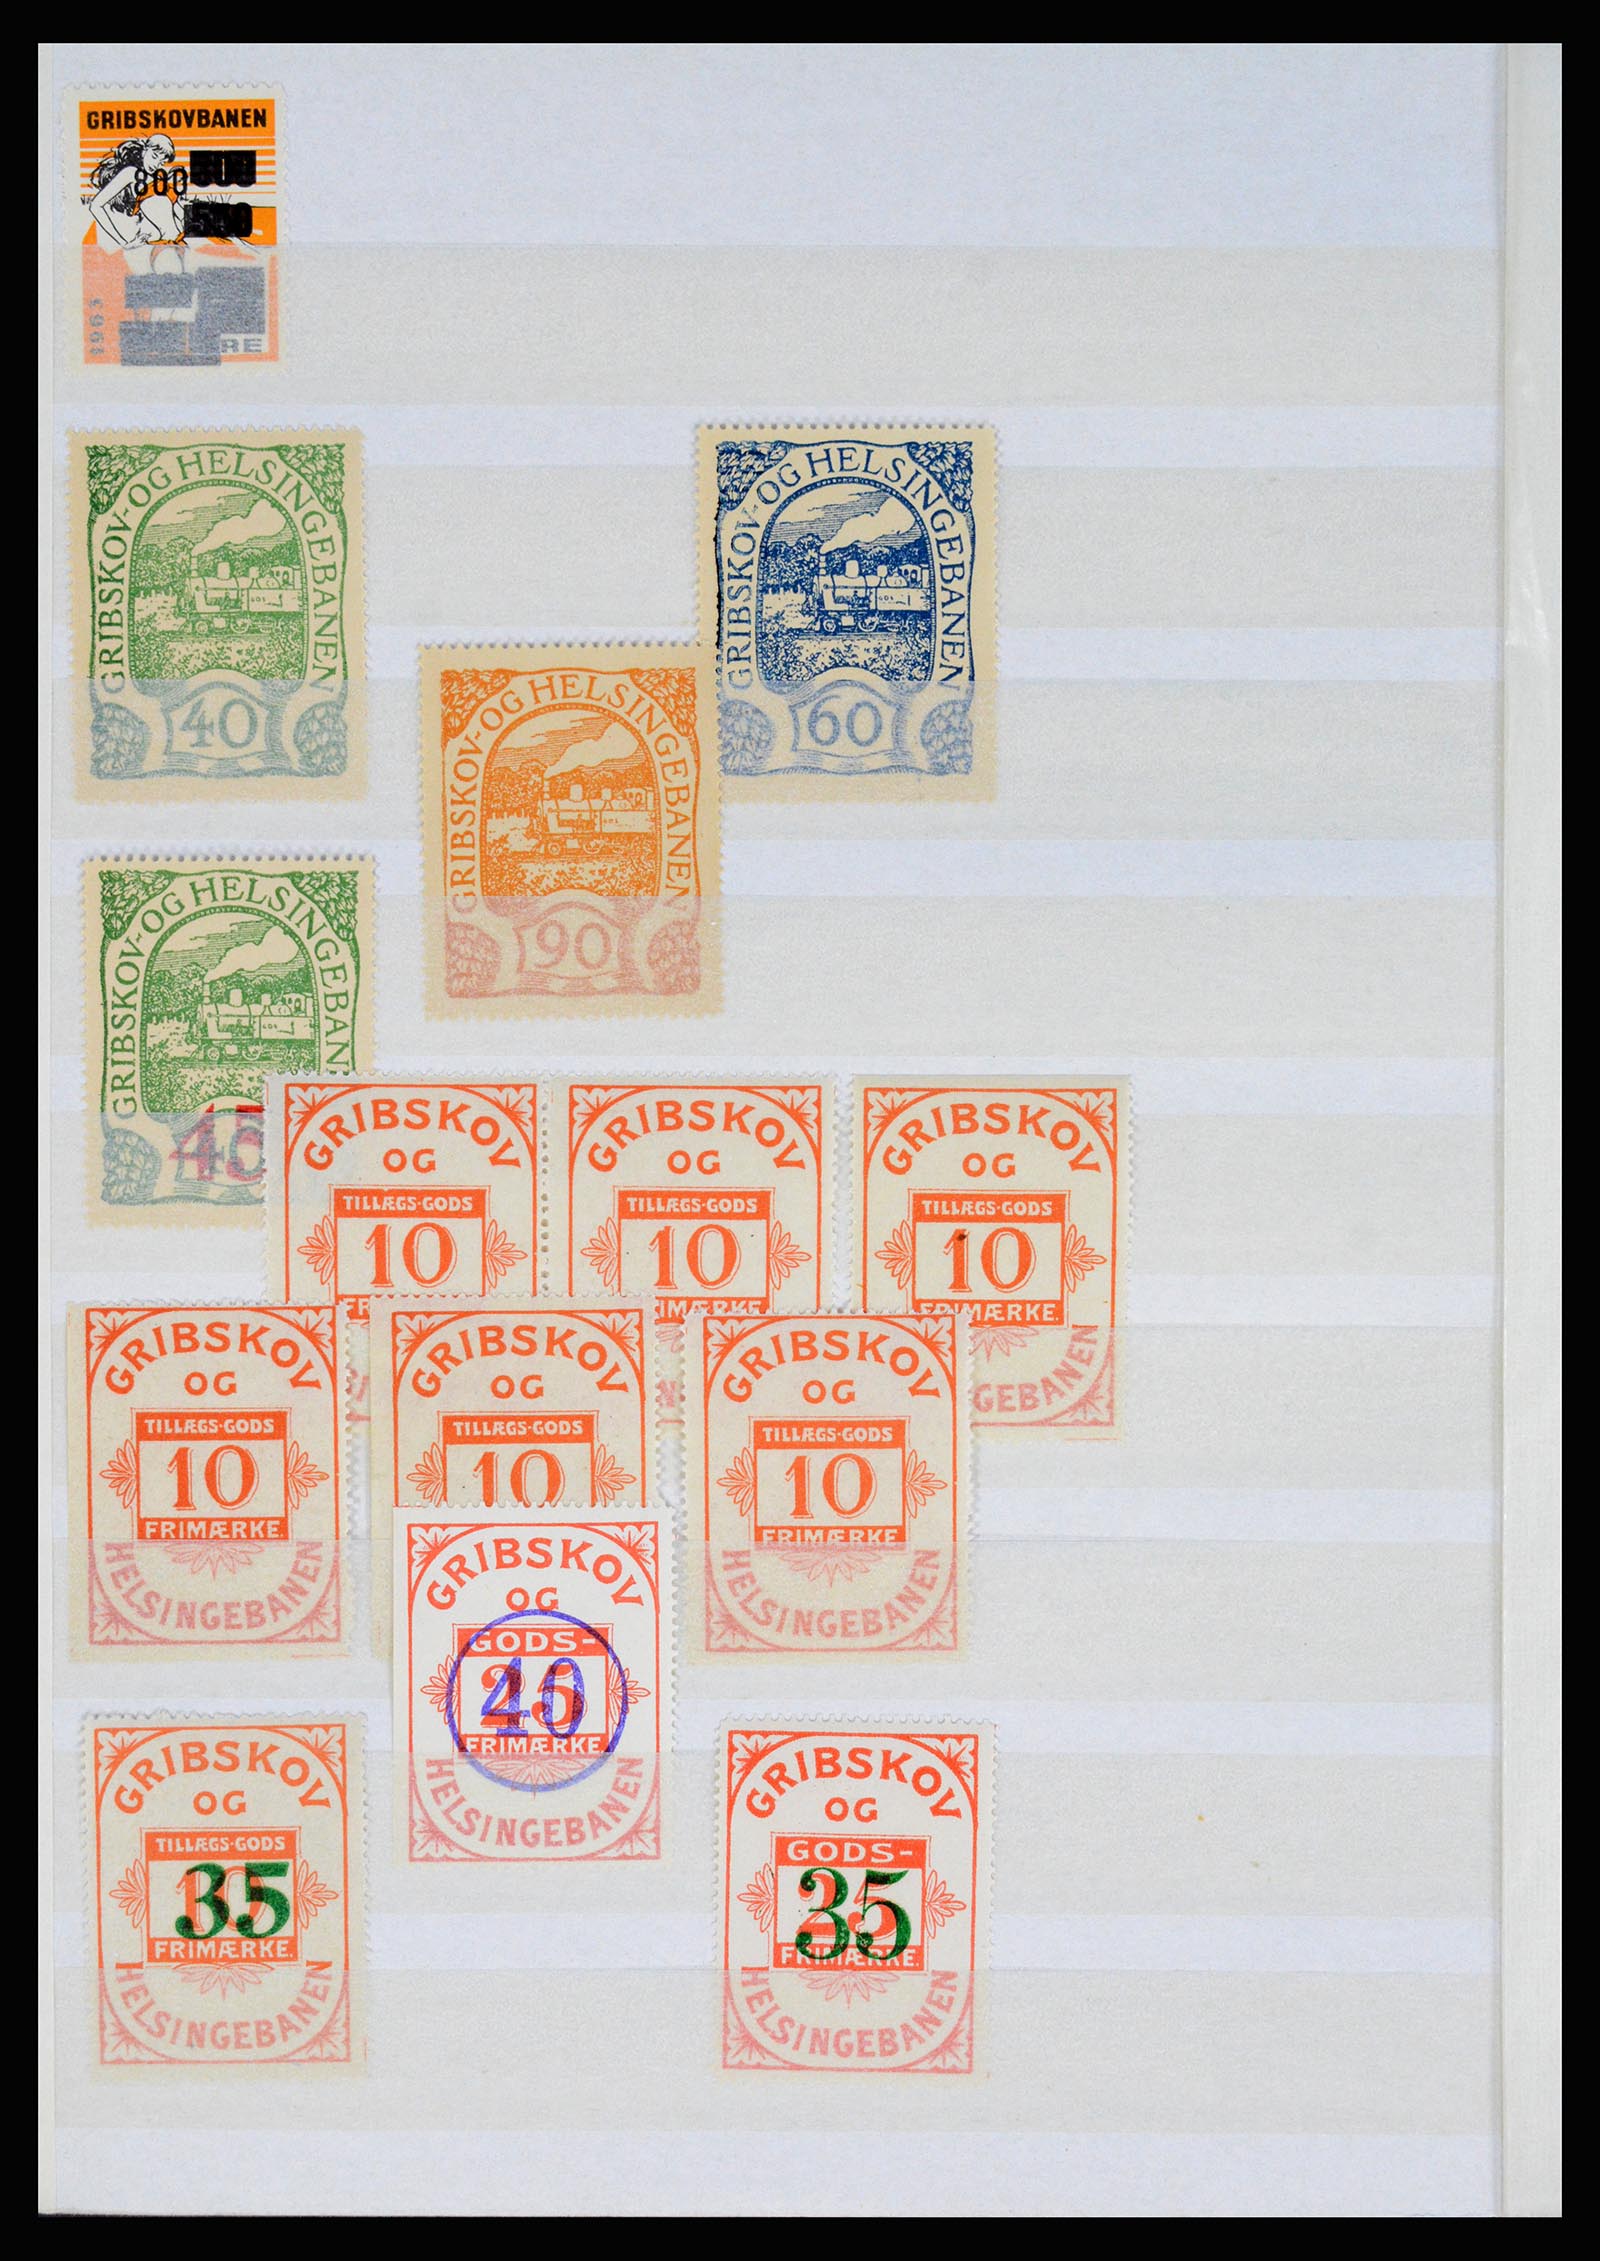 36982 022 - Stamp collection 36982 Denmark railroad stamps.